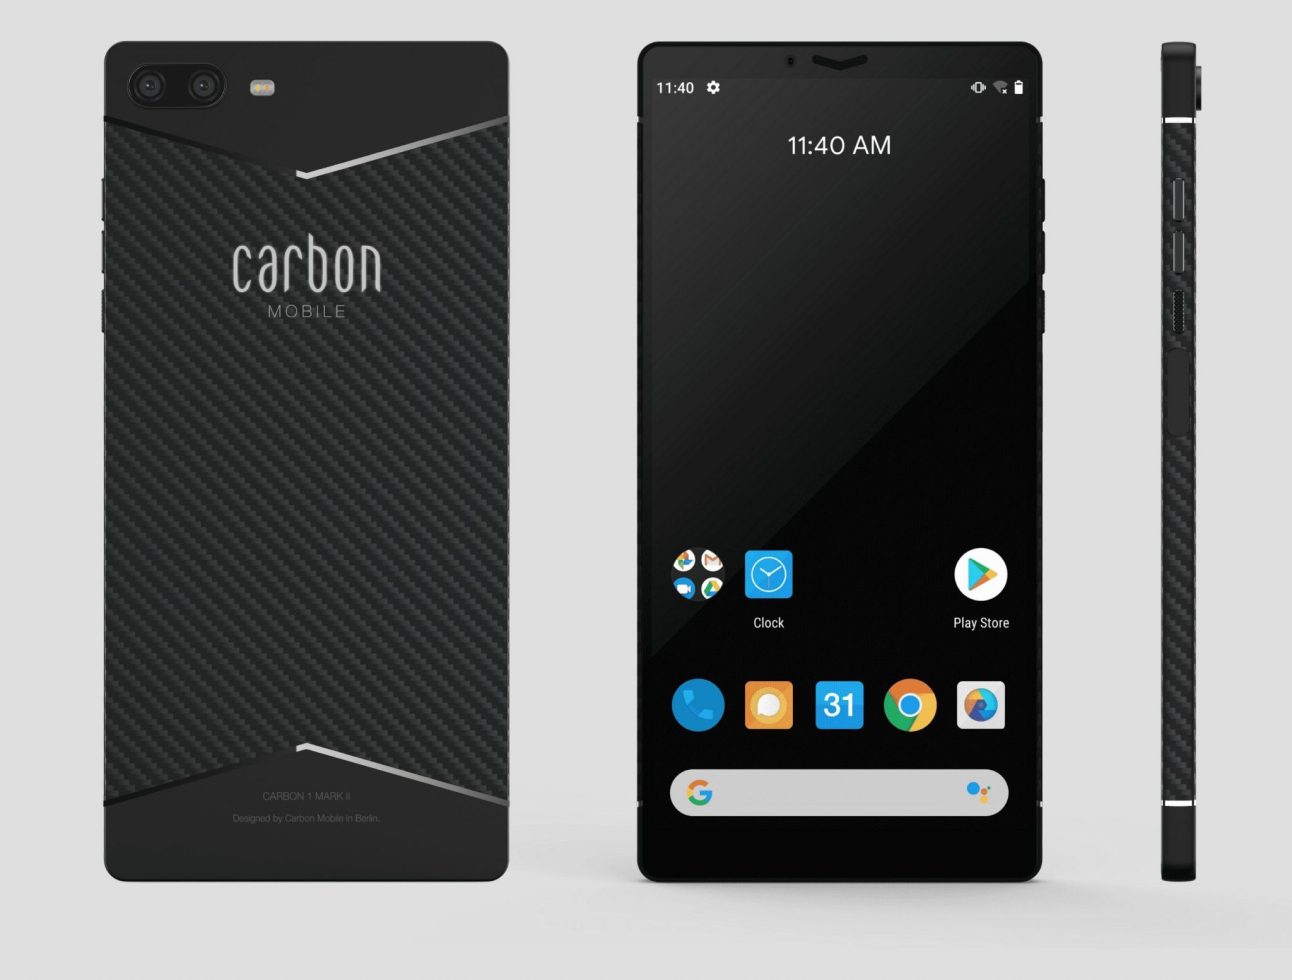 The Carbon 1 MK II is a light, thin smartphone made from carbon fibre – but is it such a big deal? | JMComms